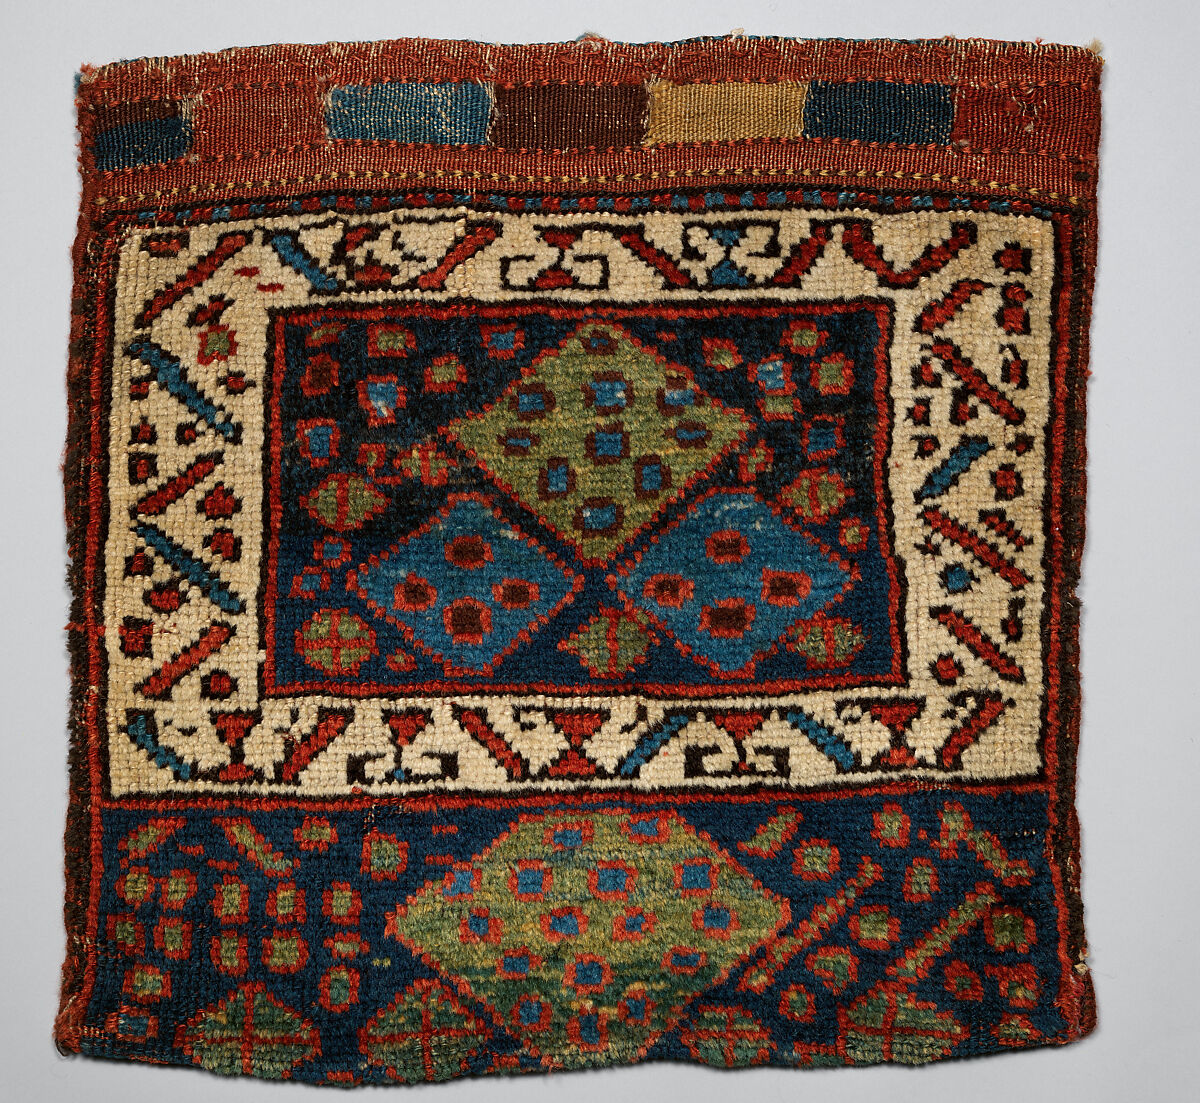 Face from Half of Double Saddle Bag (Khorjin), Wool (warp, weft, and pile); symmetrically knotted pile, tapestry weave 